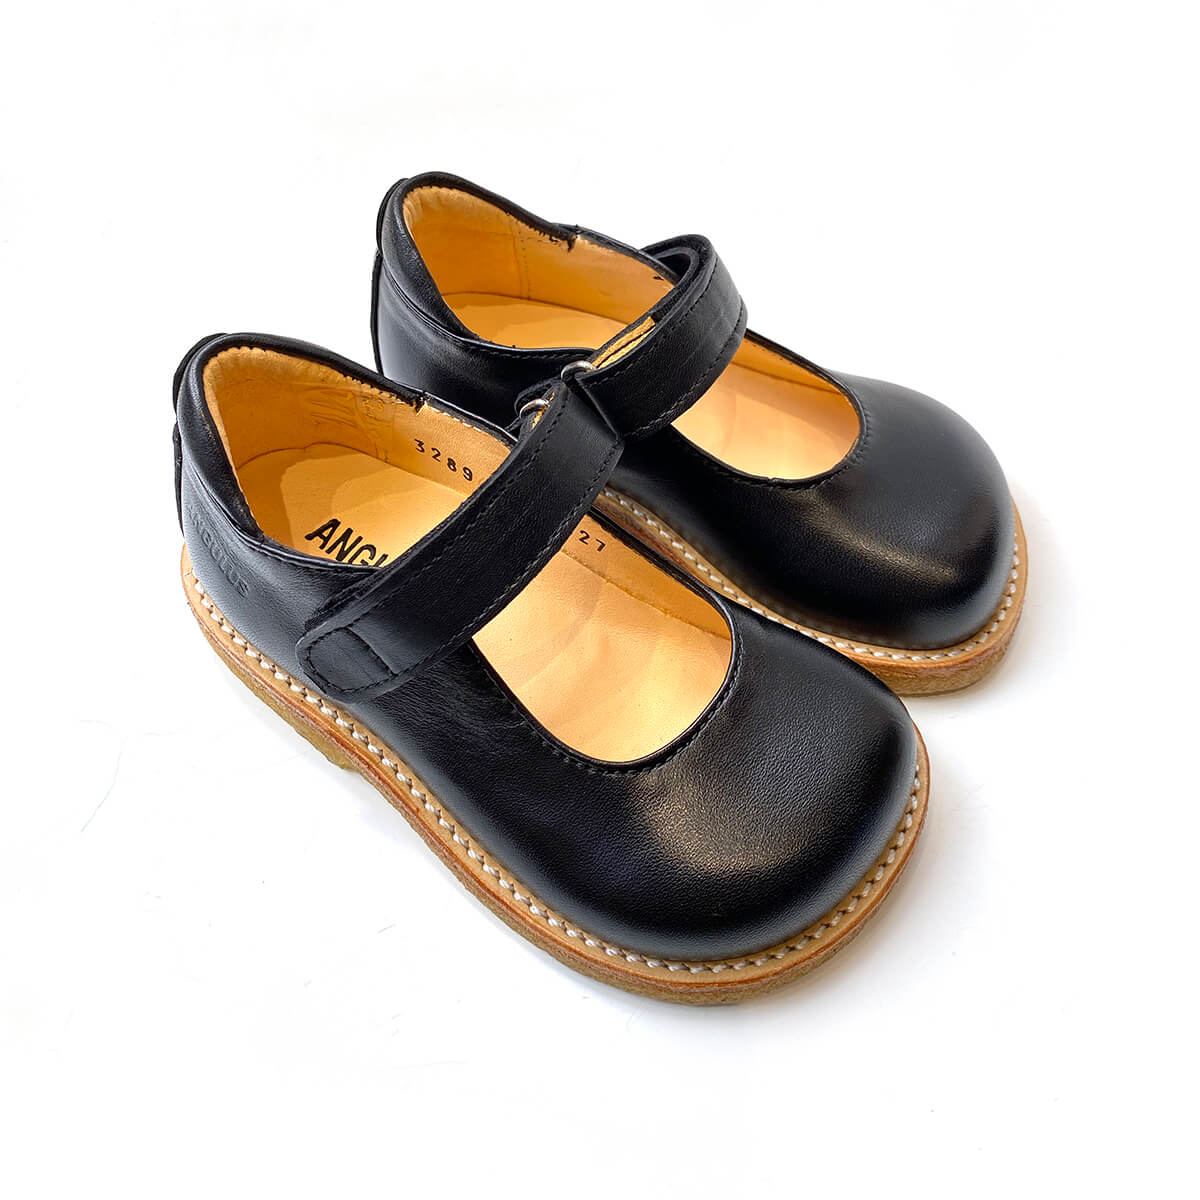 Formindske Alice Kompleks Mary Janes in Black (Wide Fit) by Angulus – Junior Edition